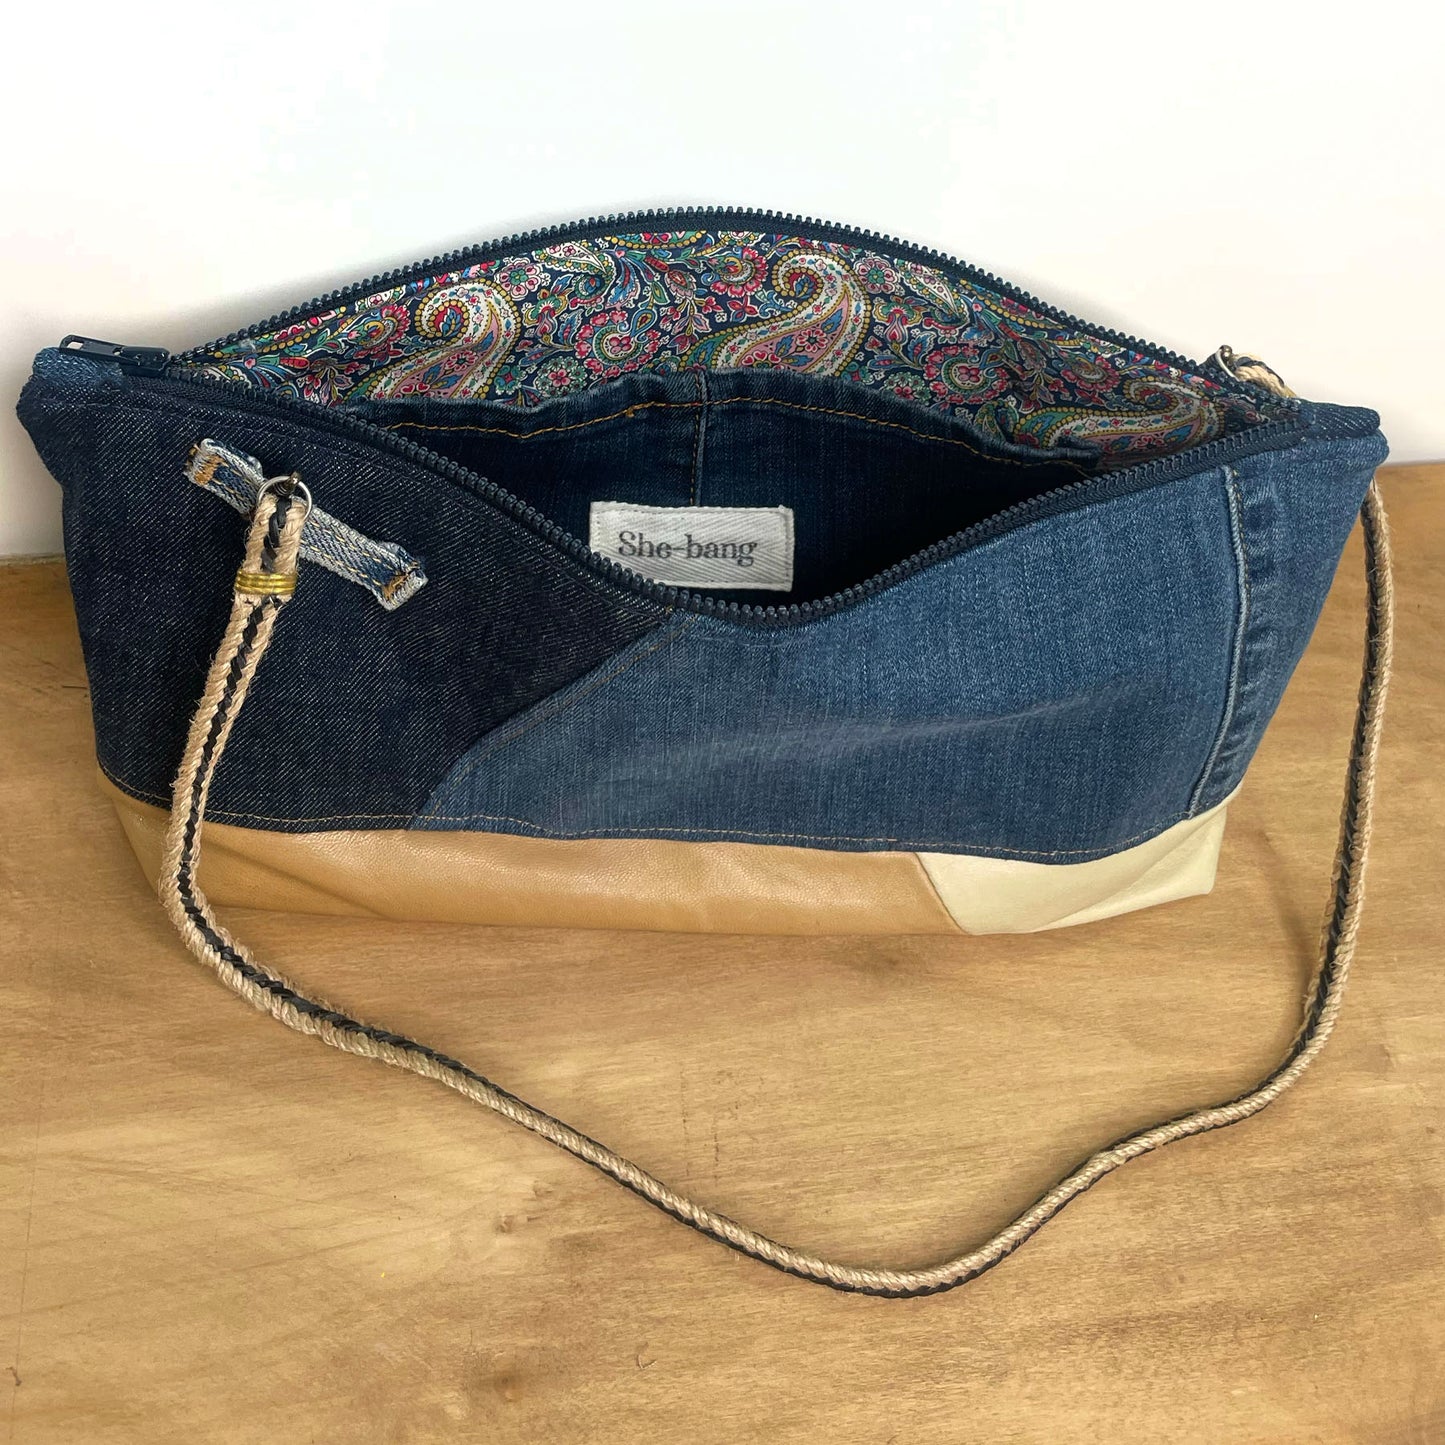 handmade unique handbags, recycled denim bags, handmade genuine leather bags, completely one of a kind bags made by local brooklyn designers.